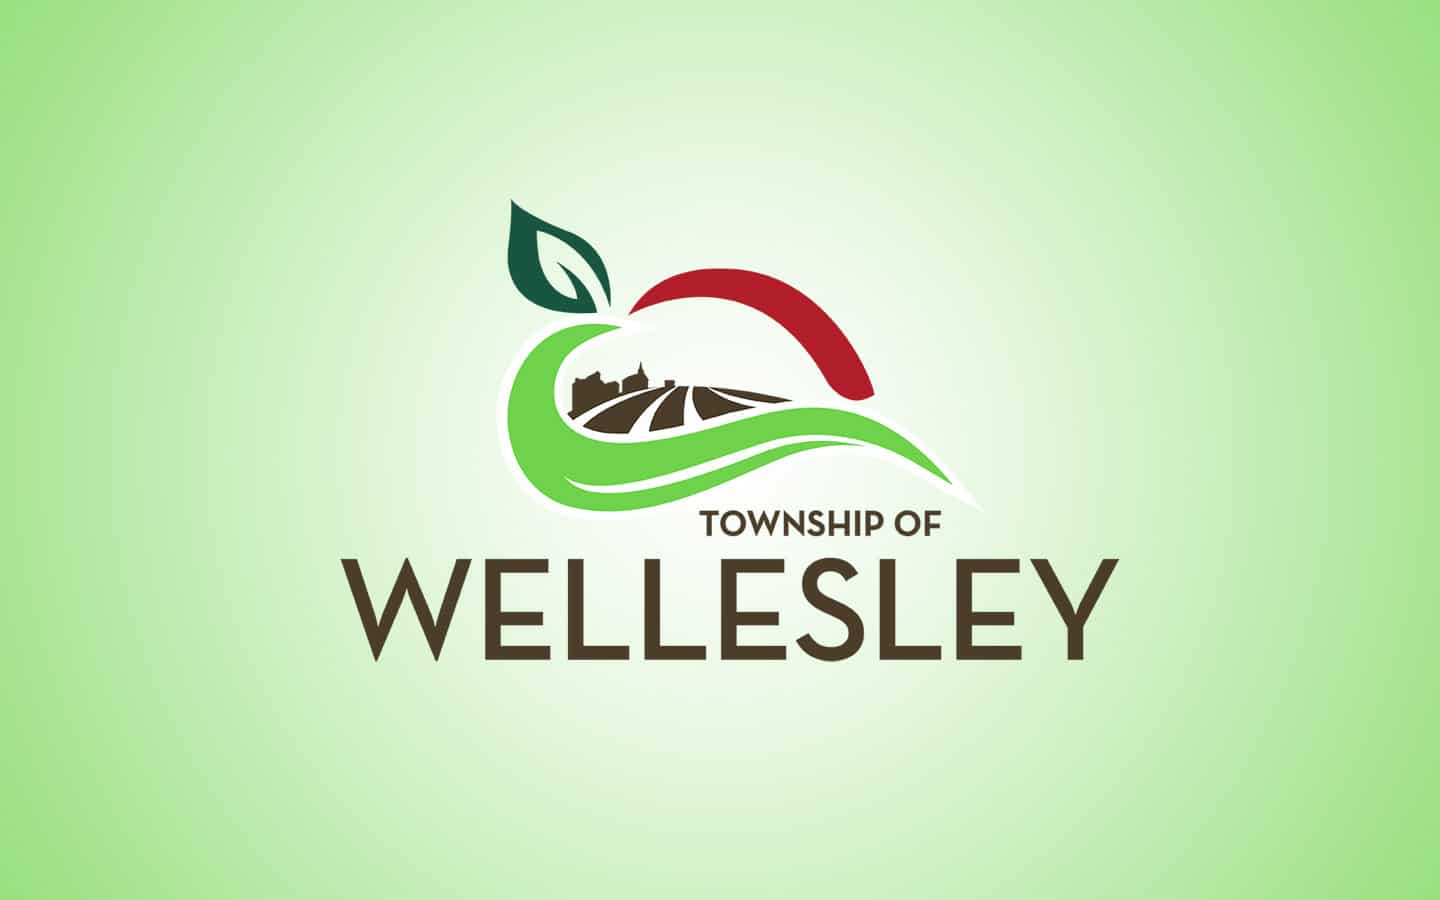 Wellesley tax bills to rise 2.75%, adding about $21 to township portion